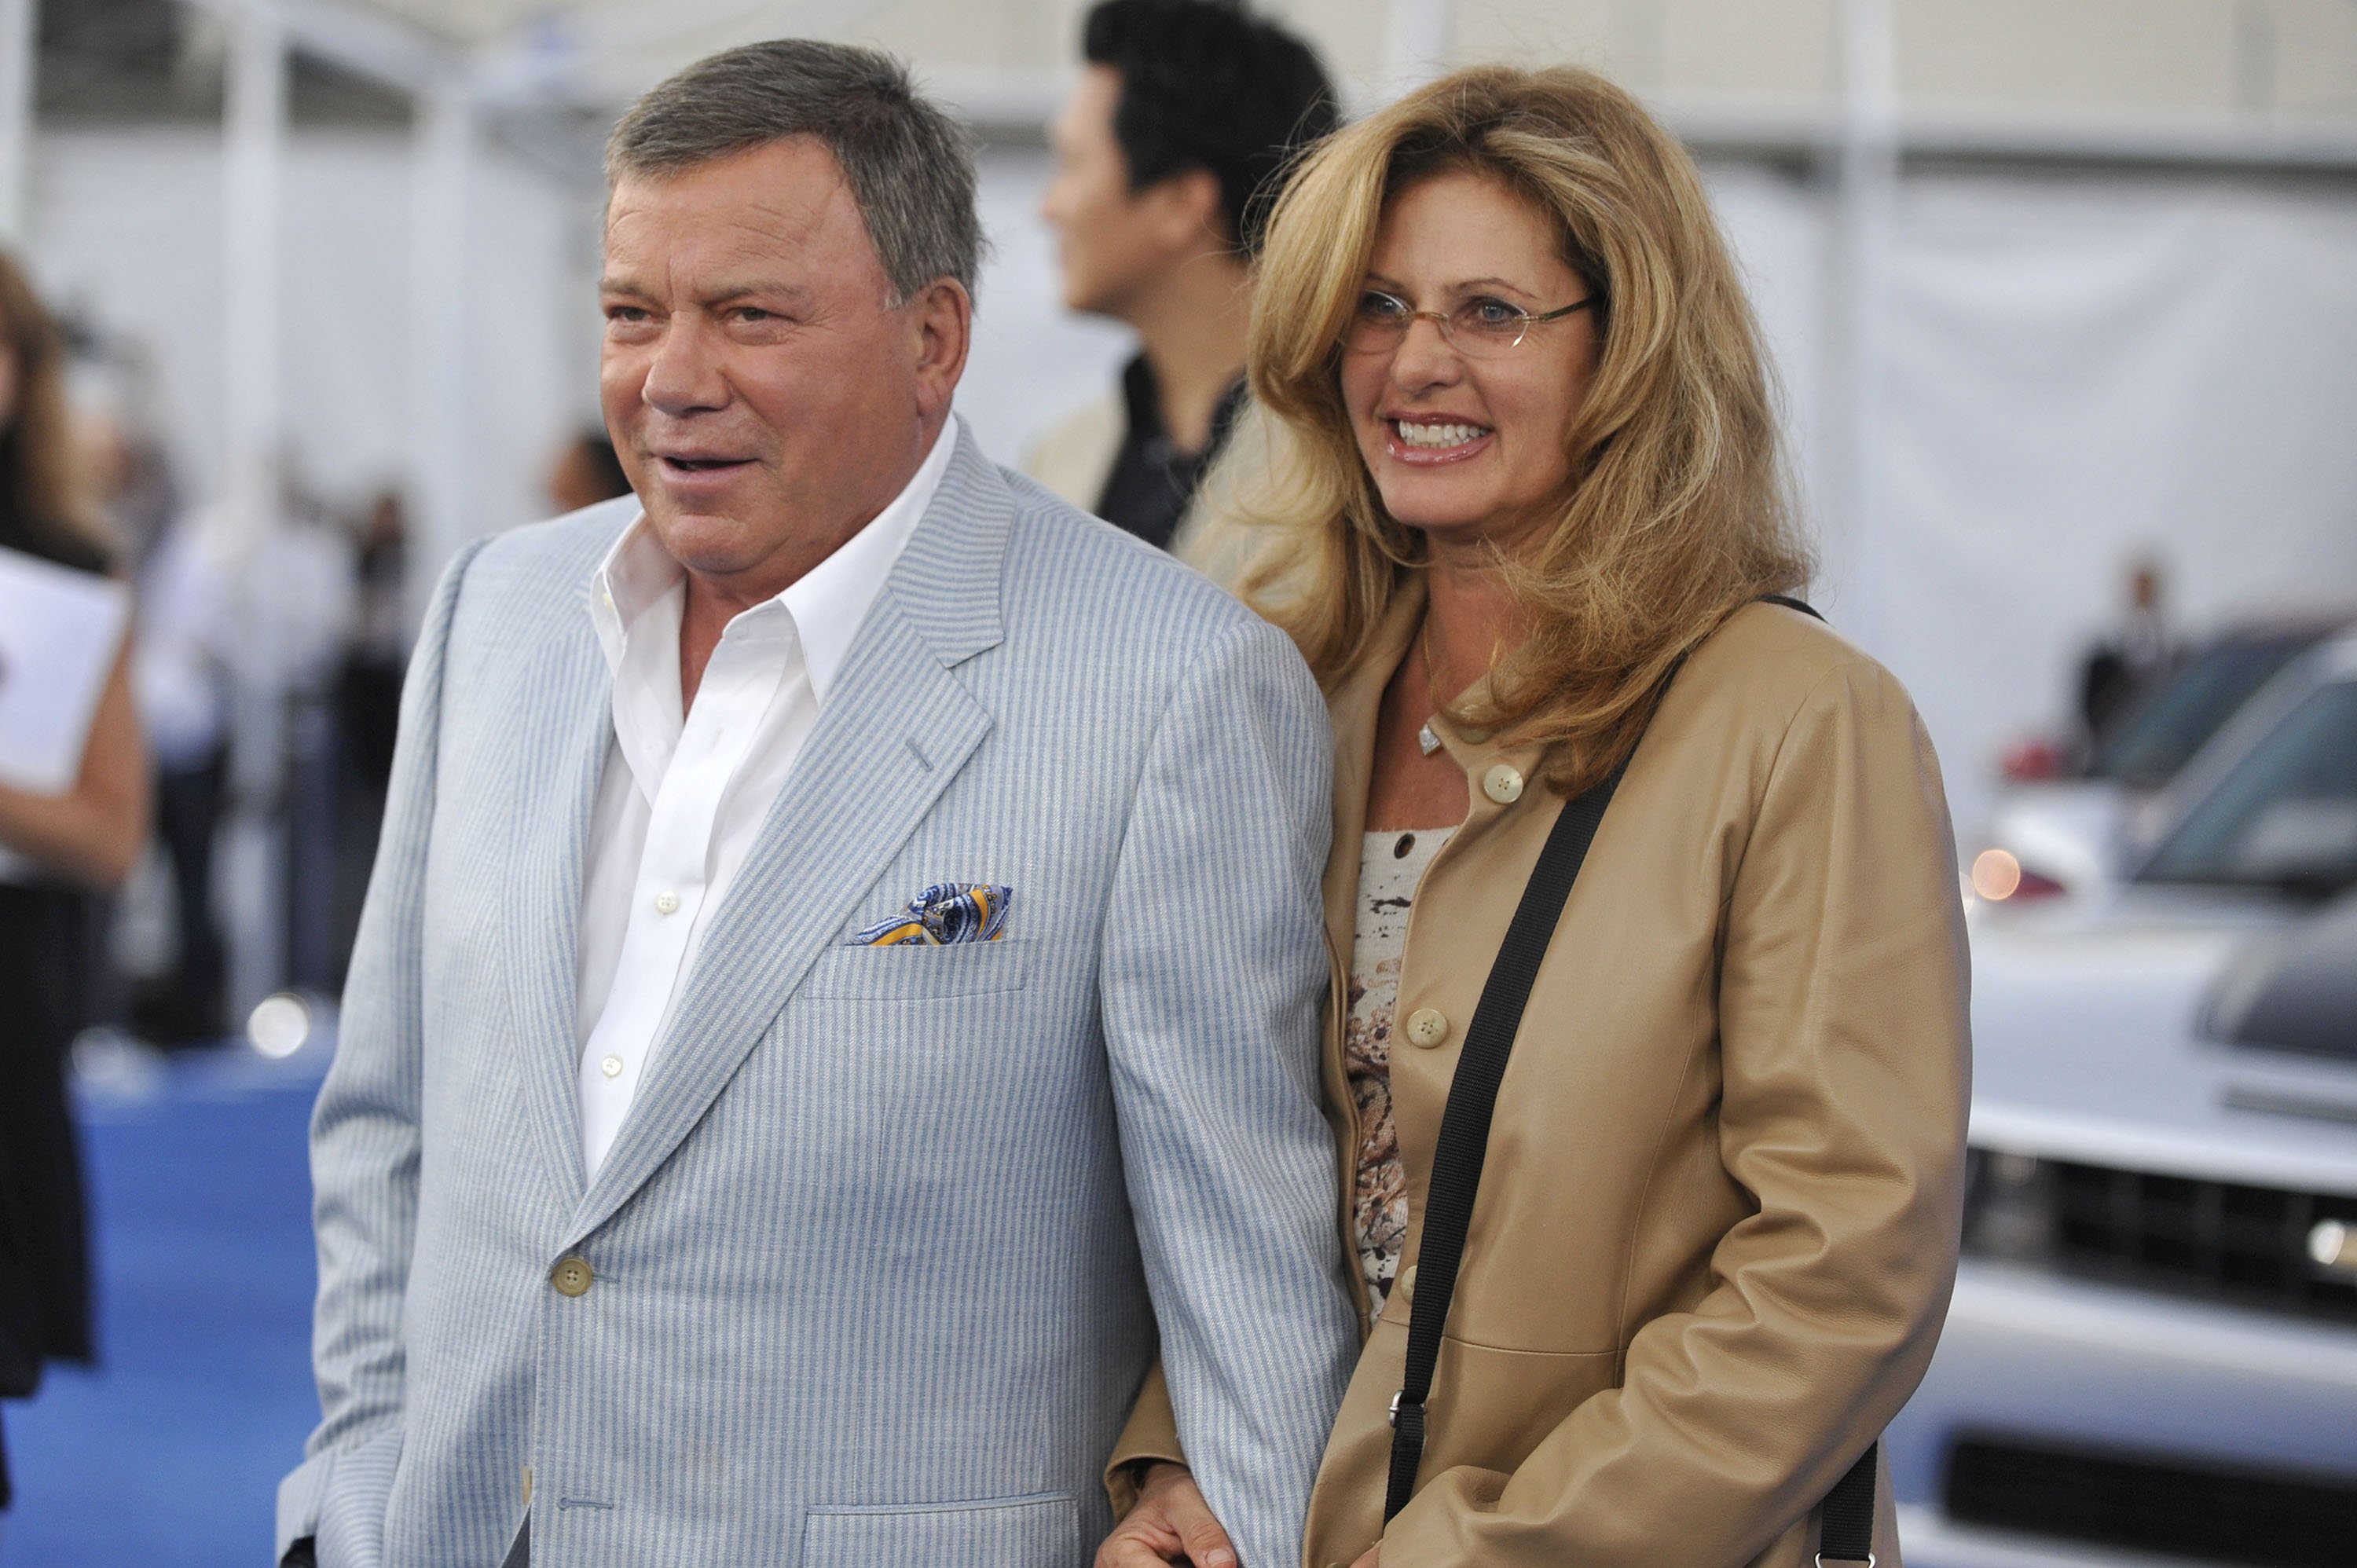 William and Elizabeth Shatner attend the CBS event "Cruze Into The Fall" held at The Colony on September 16, 2010 in Los Angeles, California.  | Photo: GettyImages